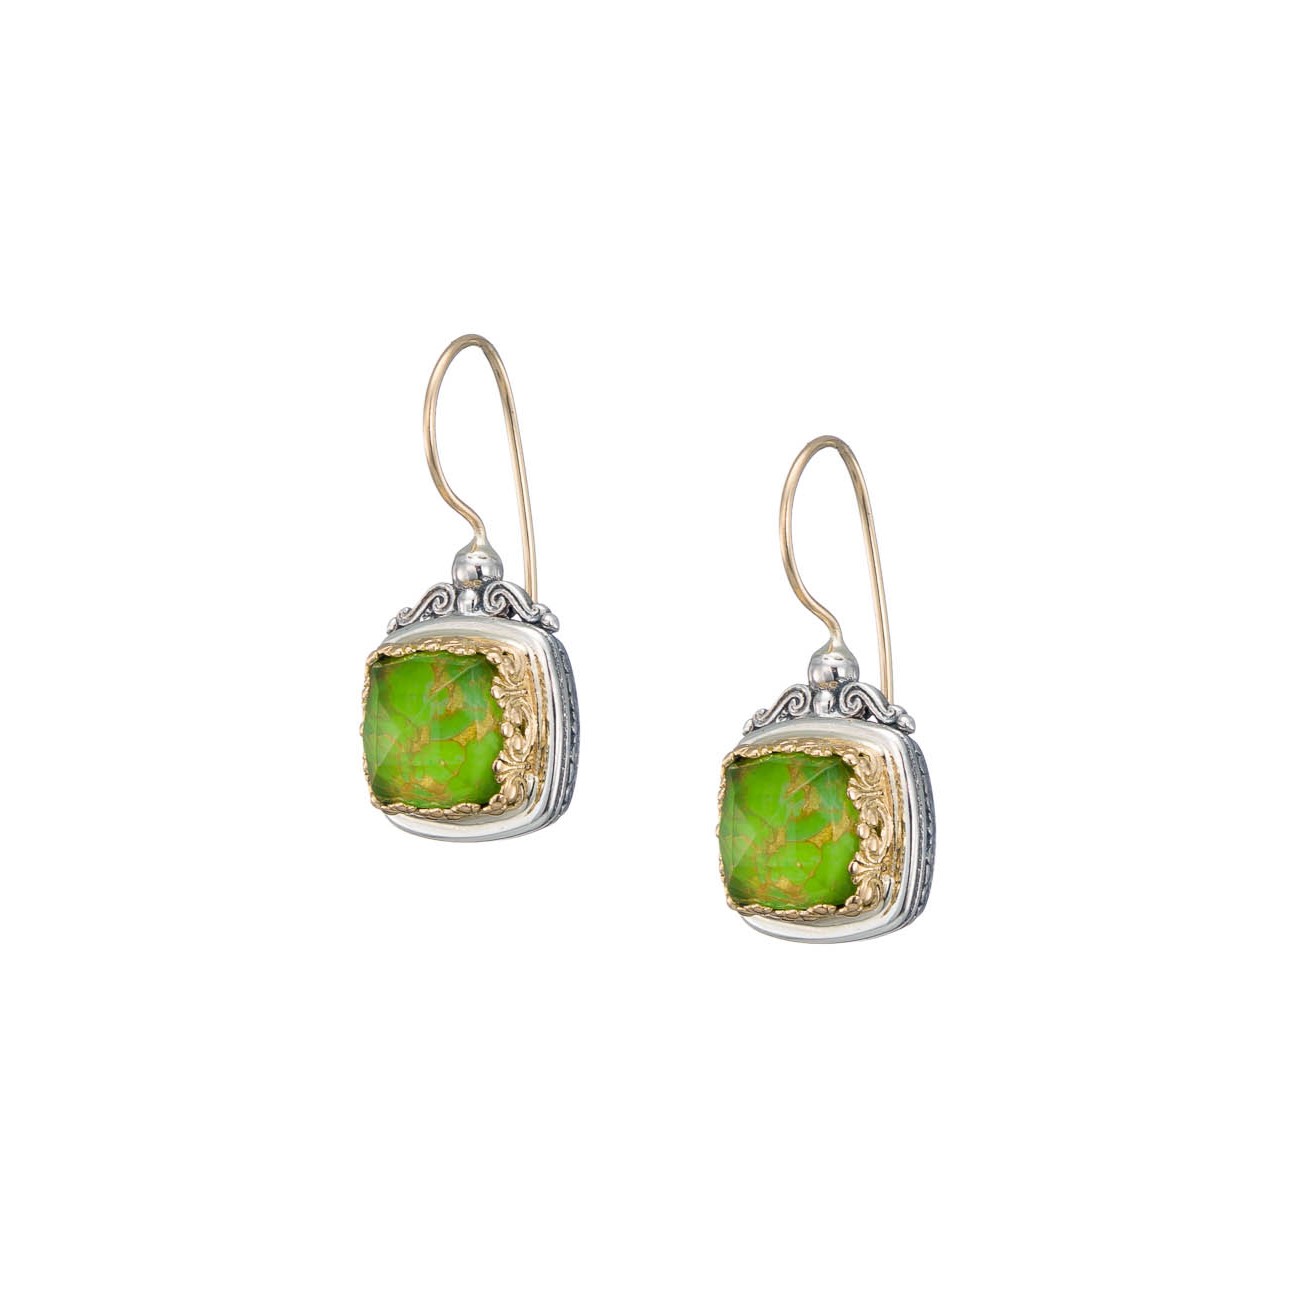 Iris small square earrings in 18K Gold and  Sterling silver with doublet stones